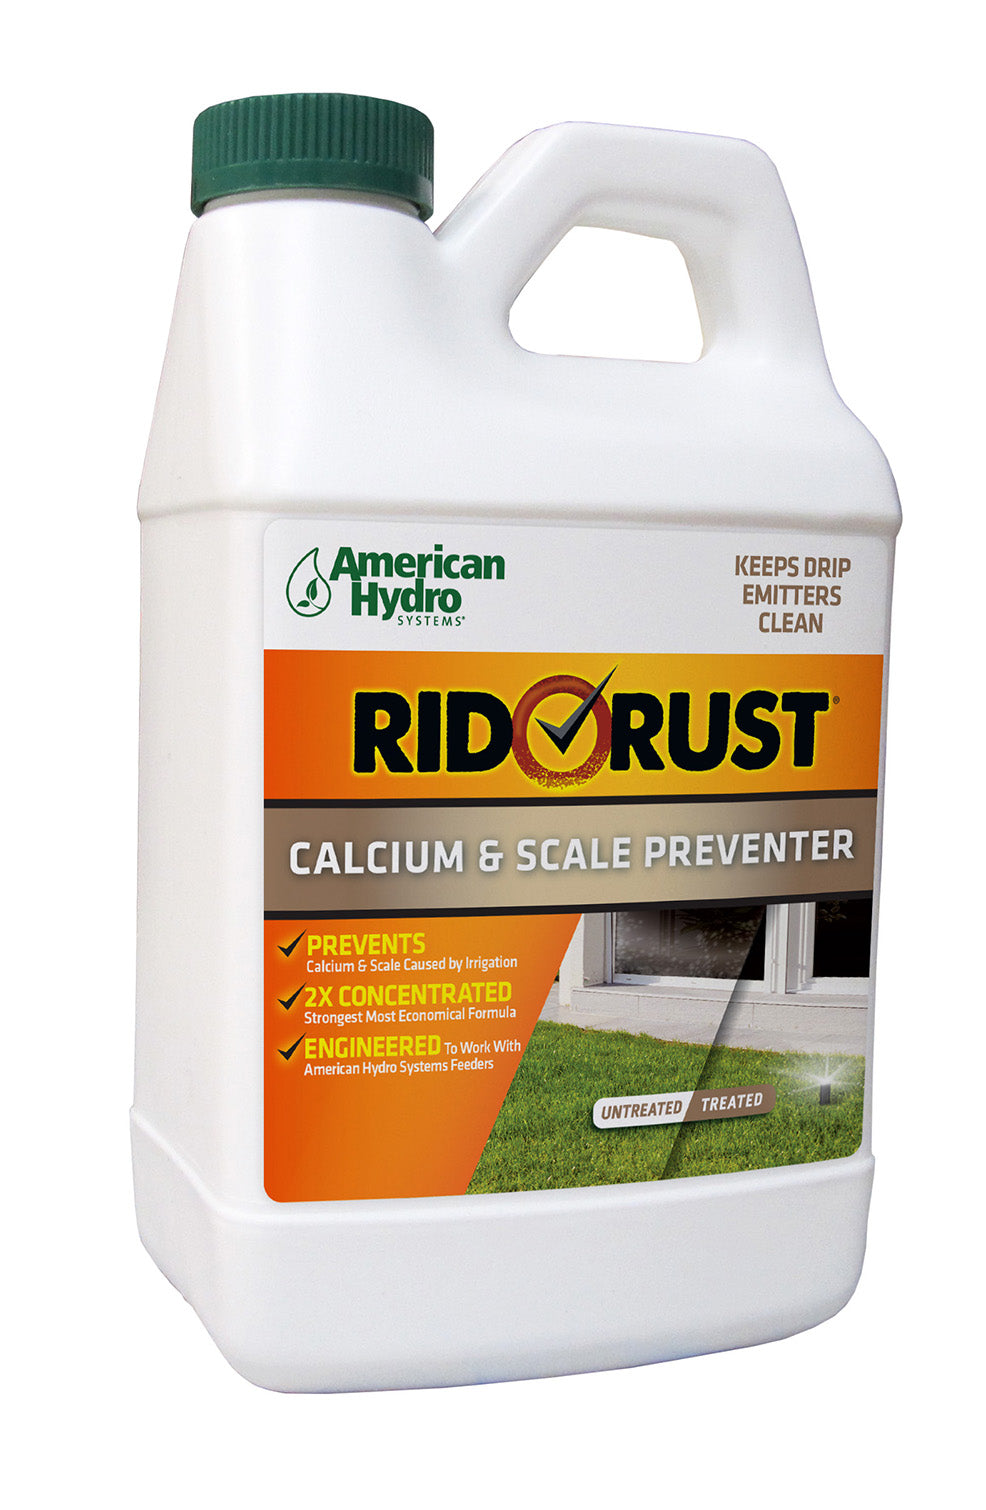 Rid O' Rust® Liquid Rust Stain Remover - Pro Products